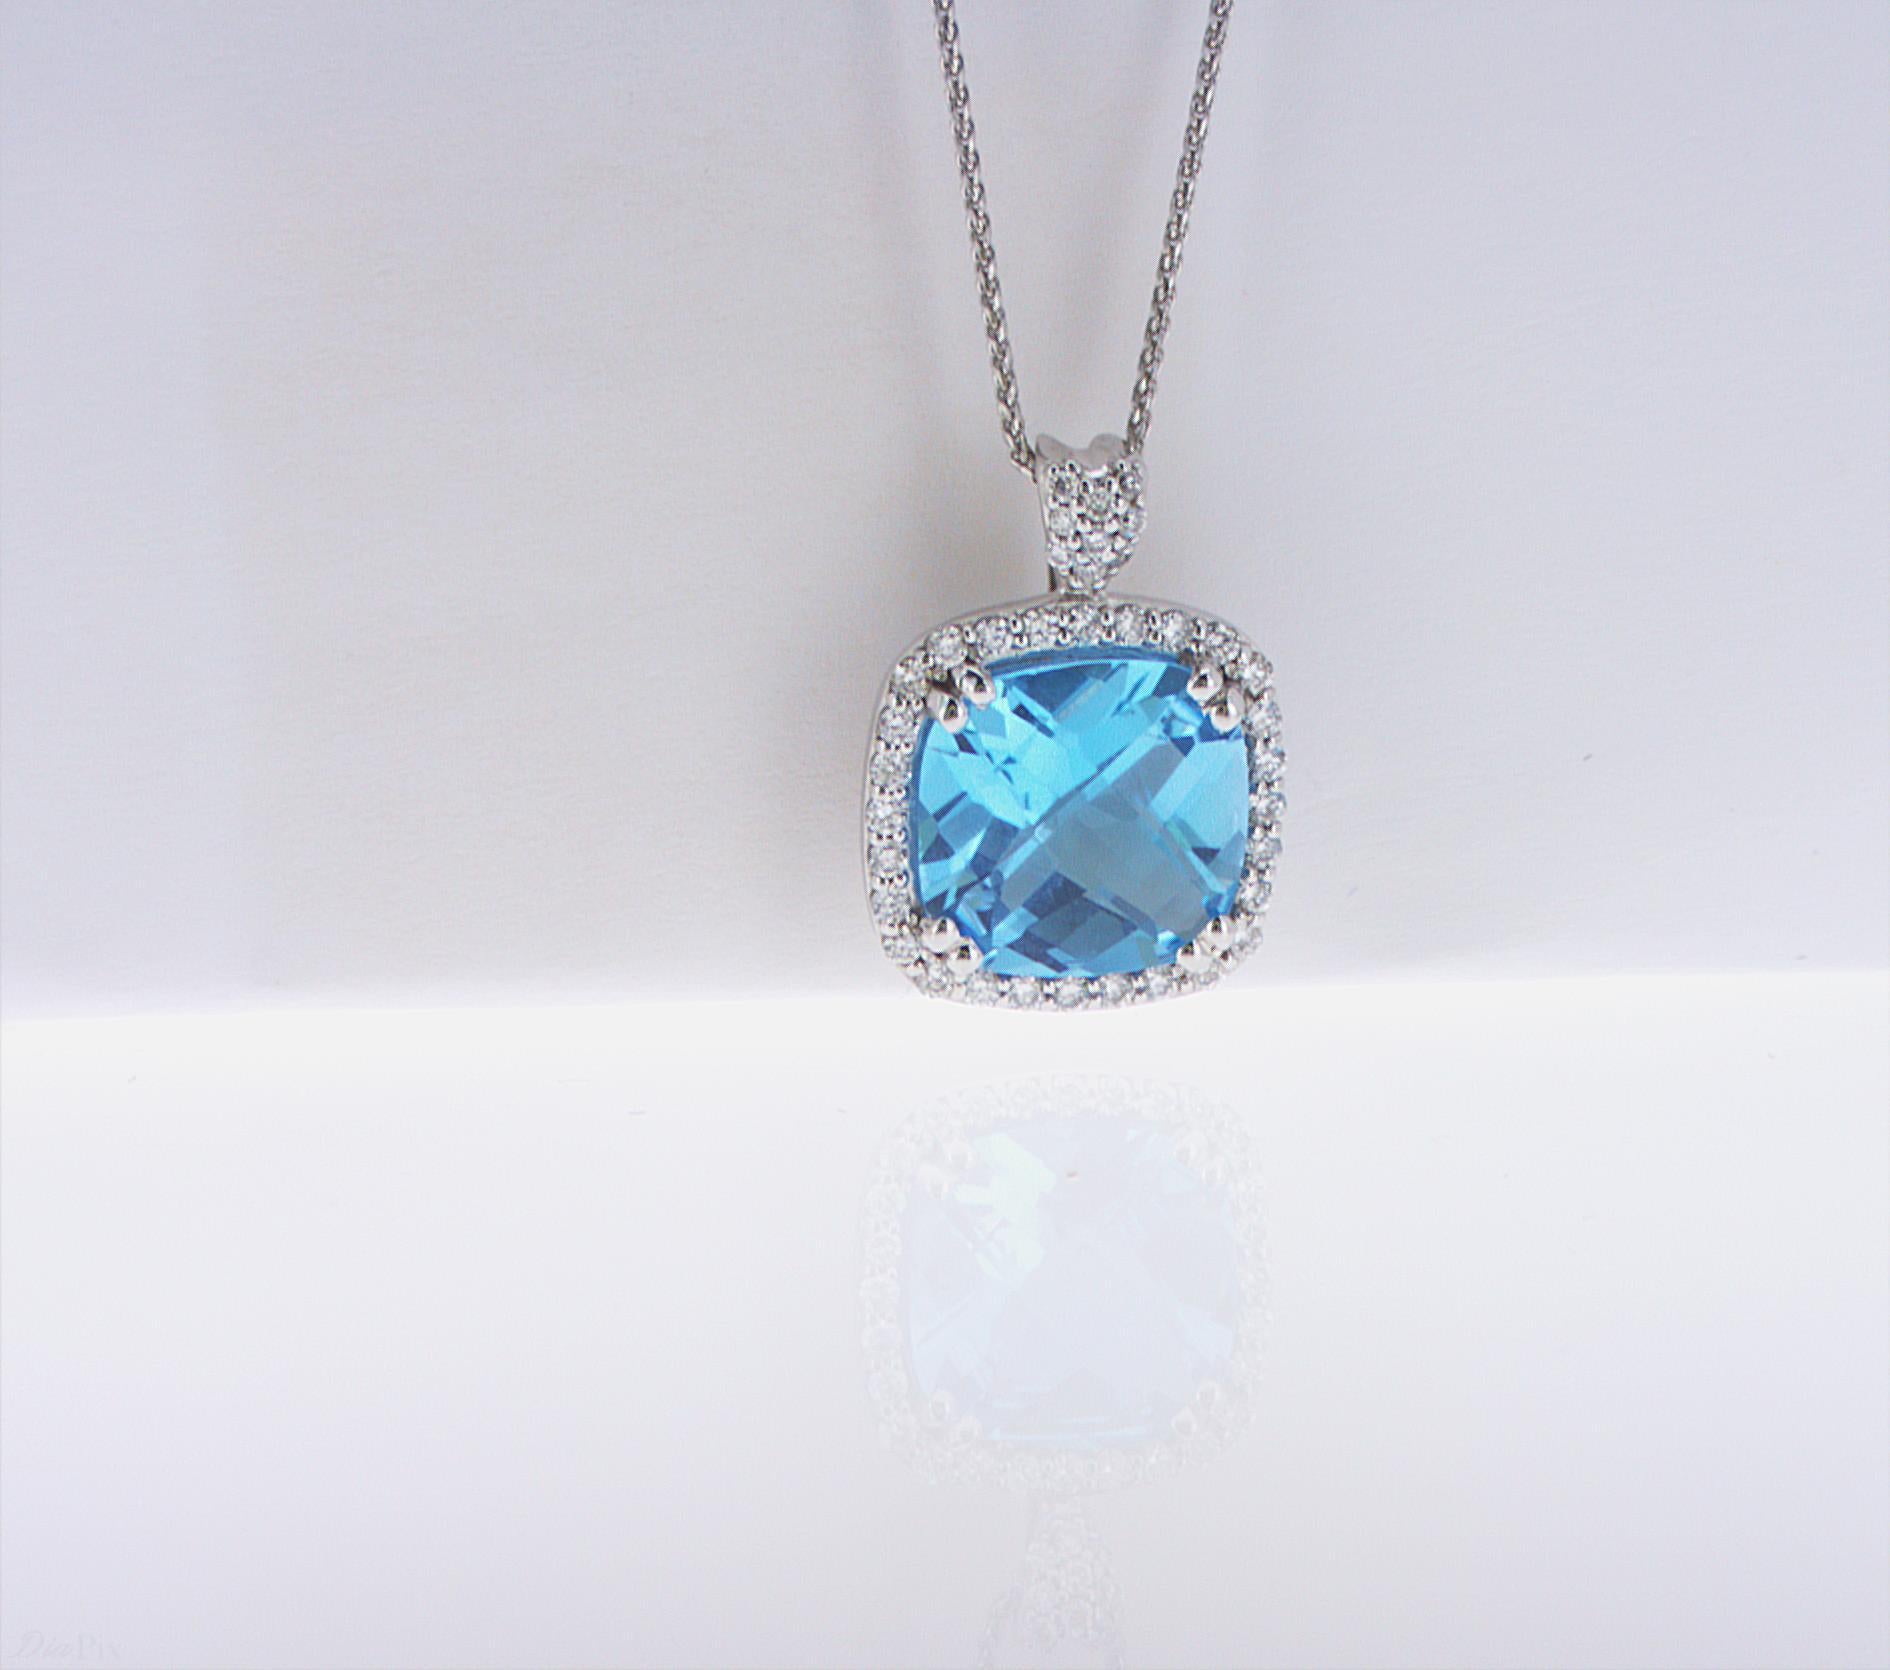 4.03ct Cushion Cut Blue Topaz in a 14k WG Setting, featuring 0.26ct total weight of accent Diamonds. 18